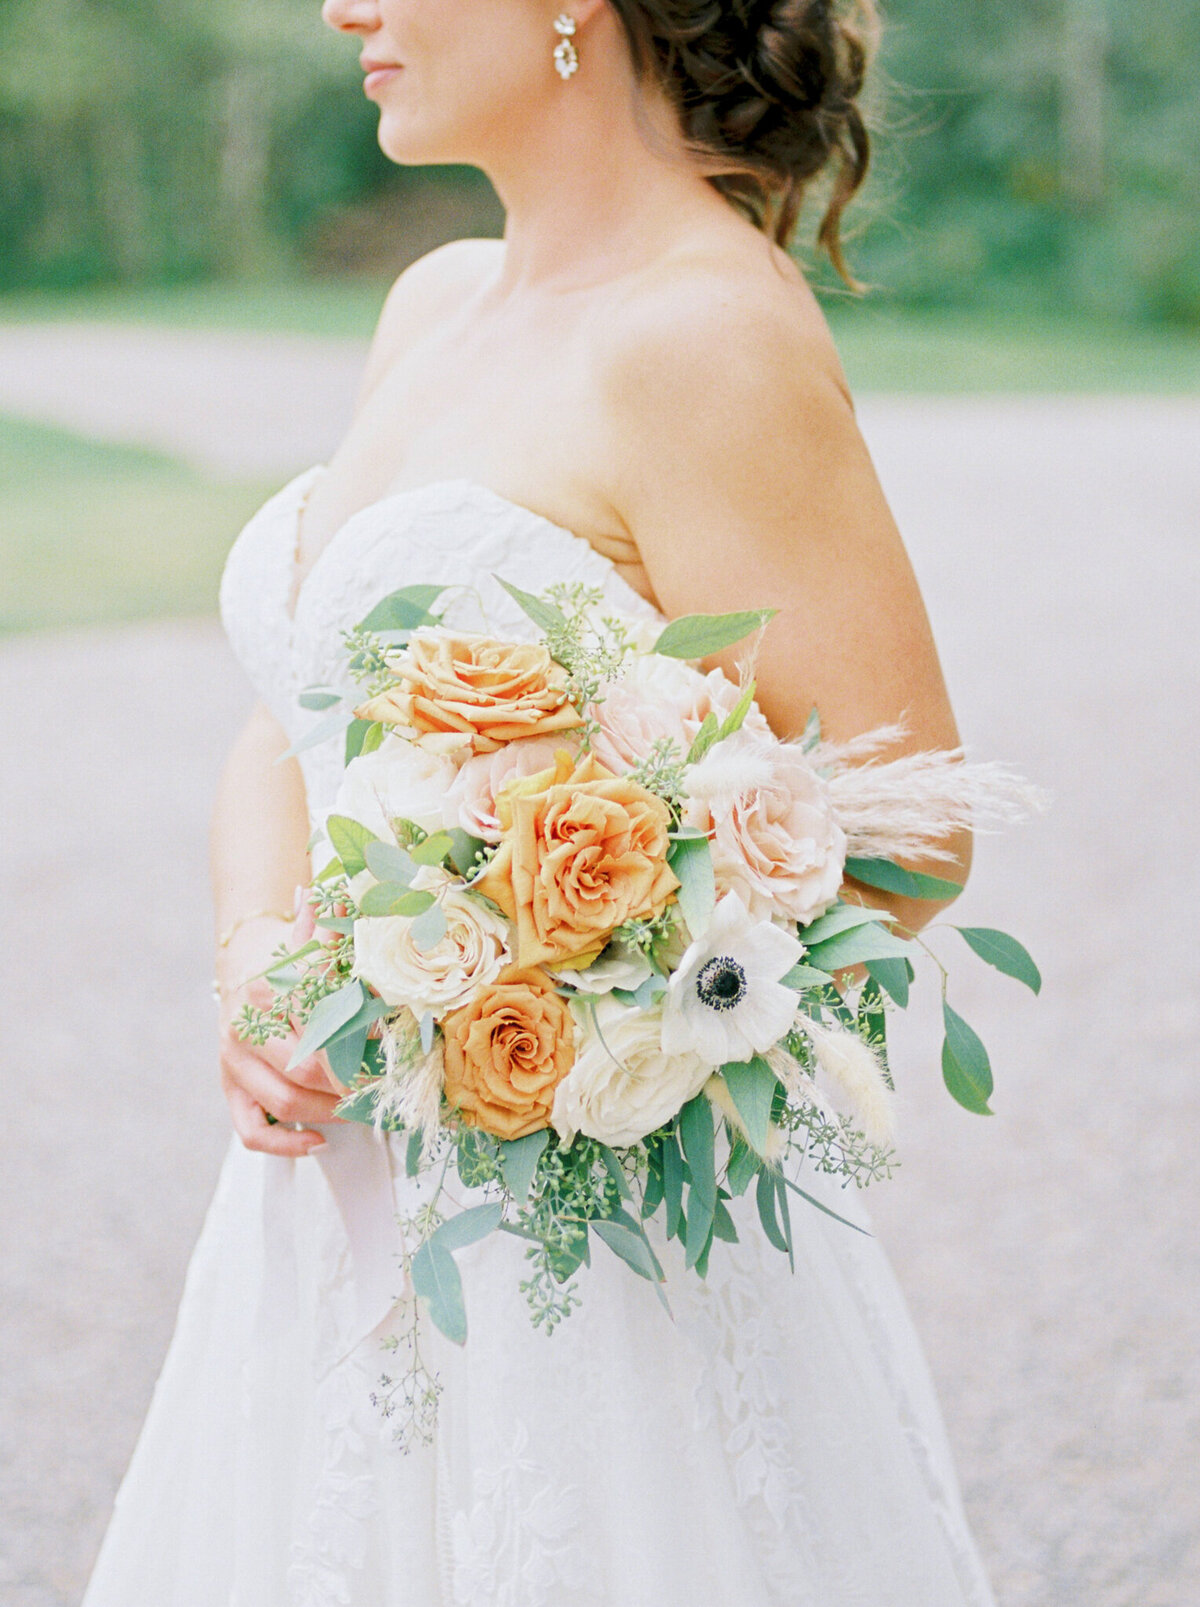 Bright and romantic orange, pink and white bouquet by Lovella Lifestyle, whimsical and romantic Edmonton wedding florist, featured on the Brontë Bride Vendor Guide.